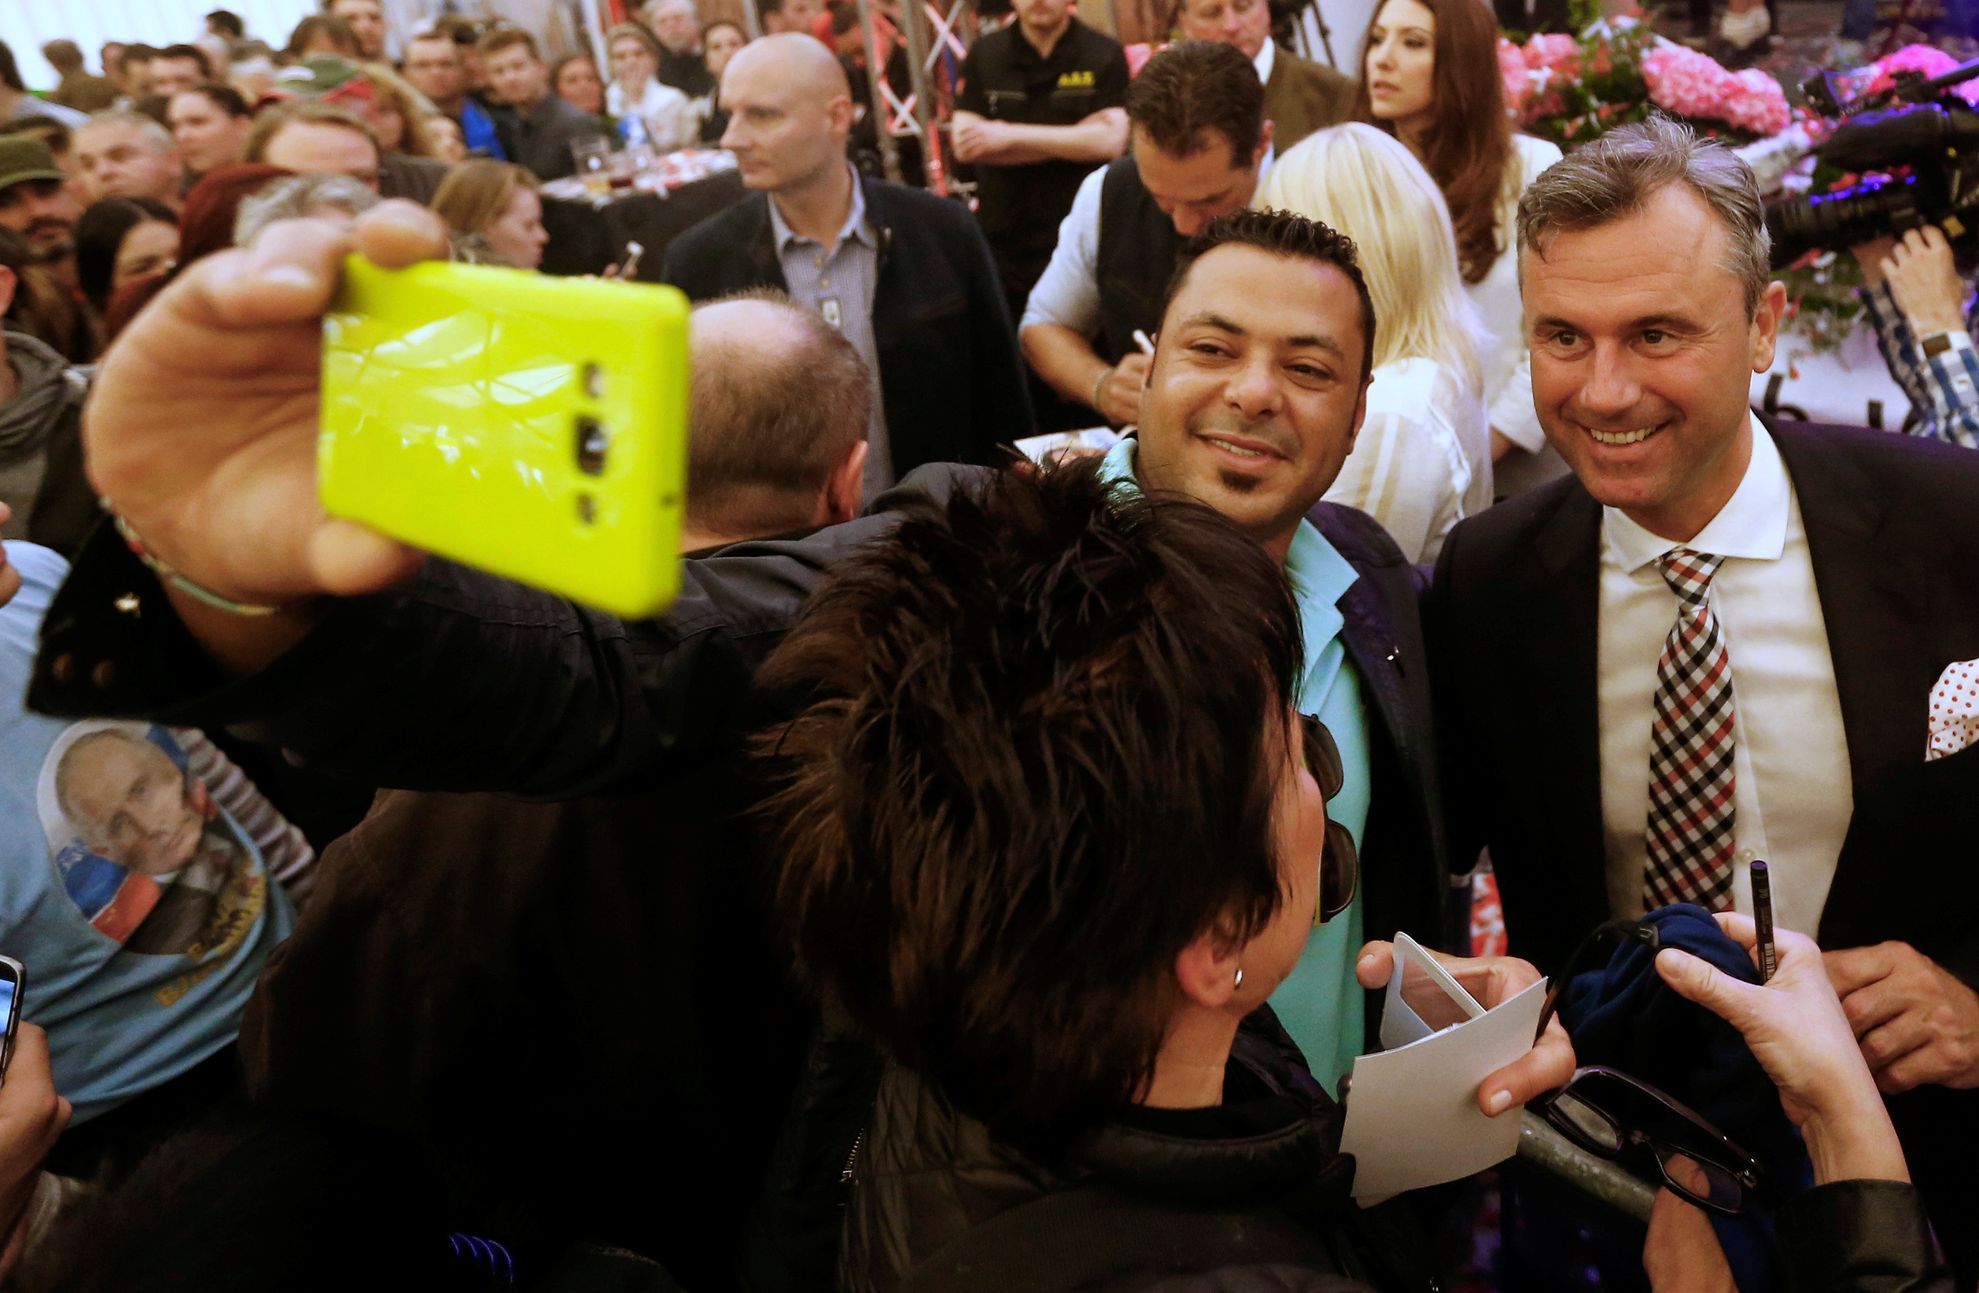 Rakousko volby A man takes a selfie with presidential candidate Hofer during a May Day event in Linz